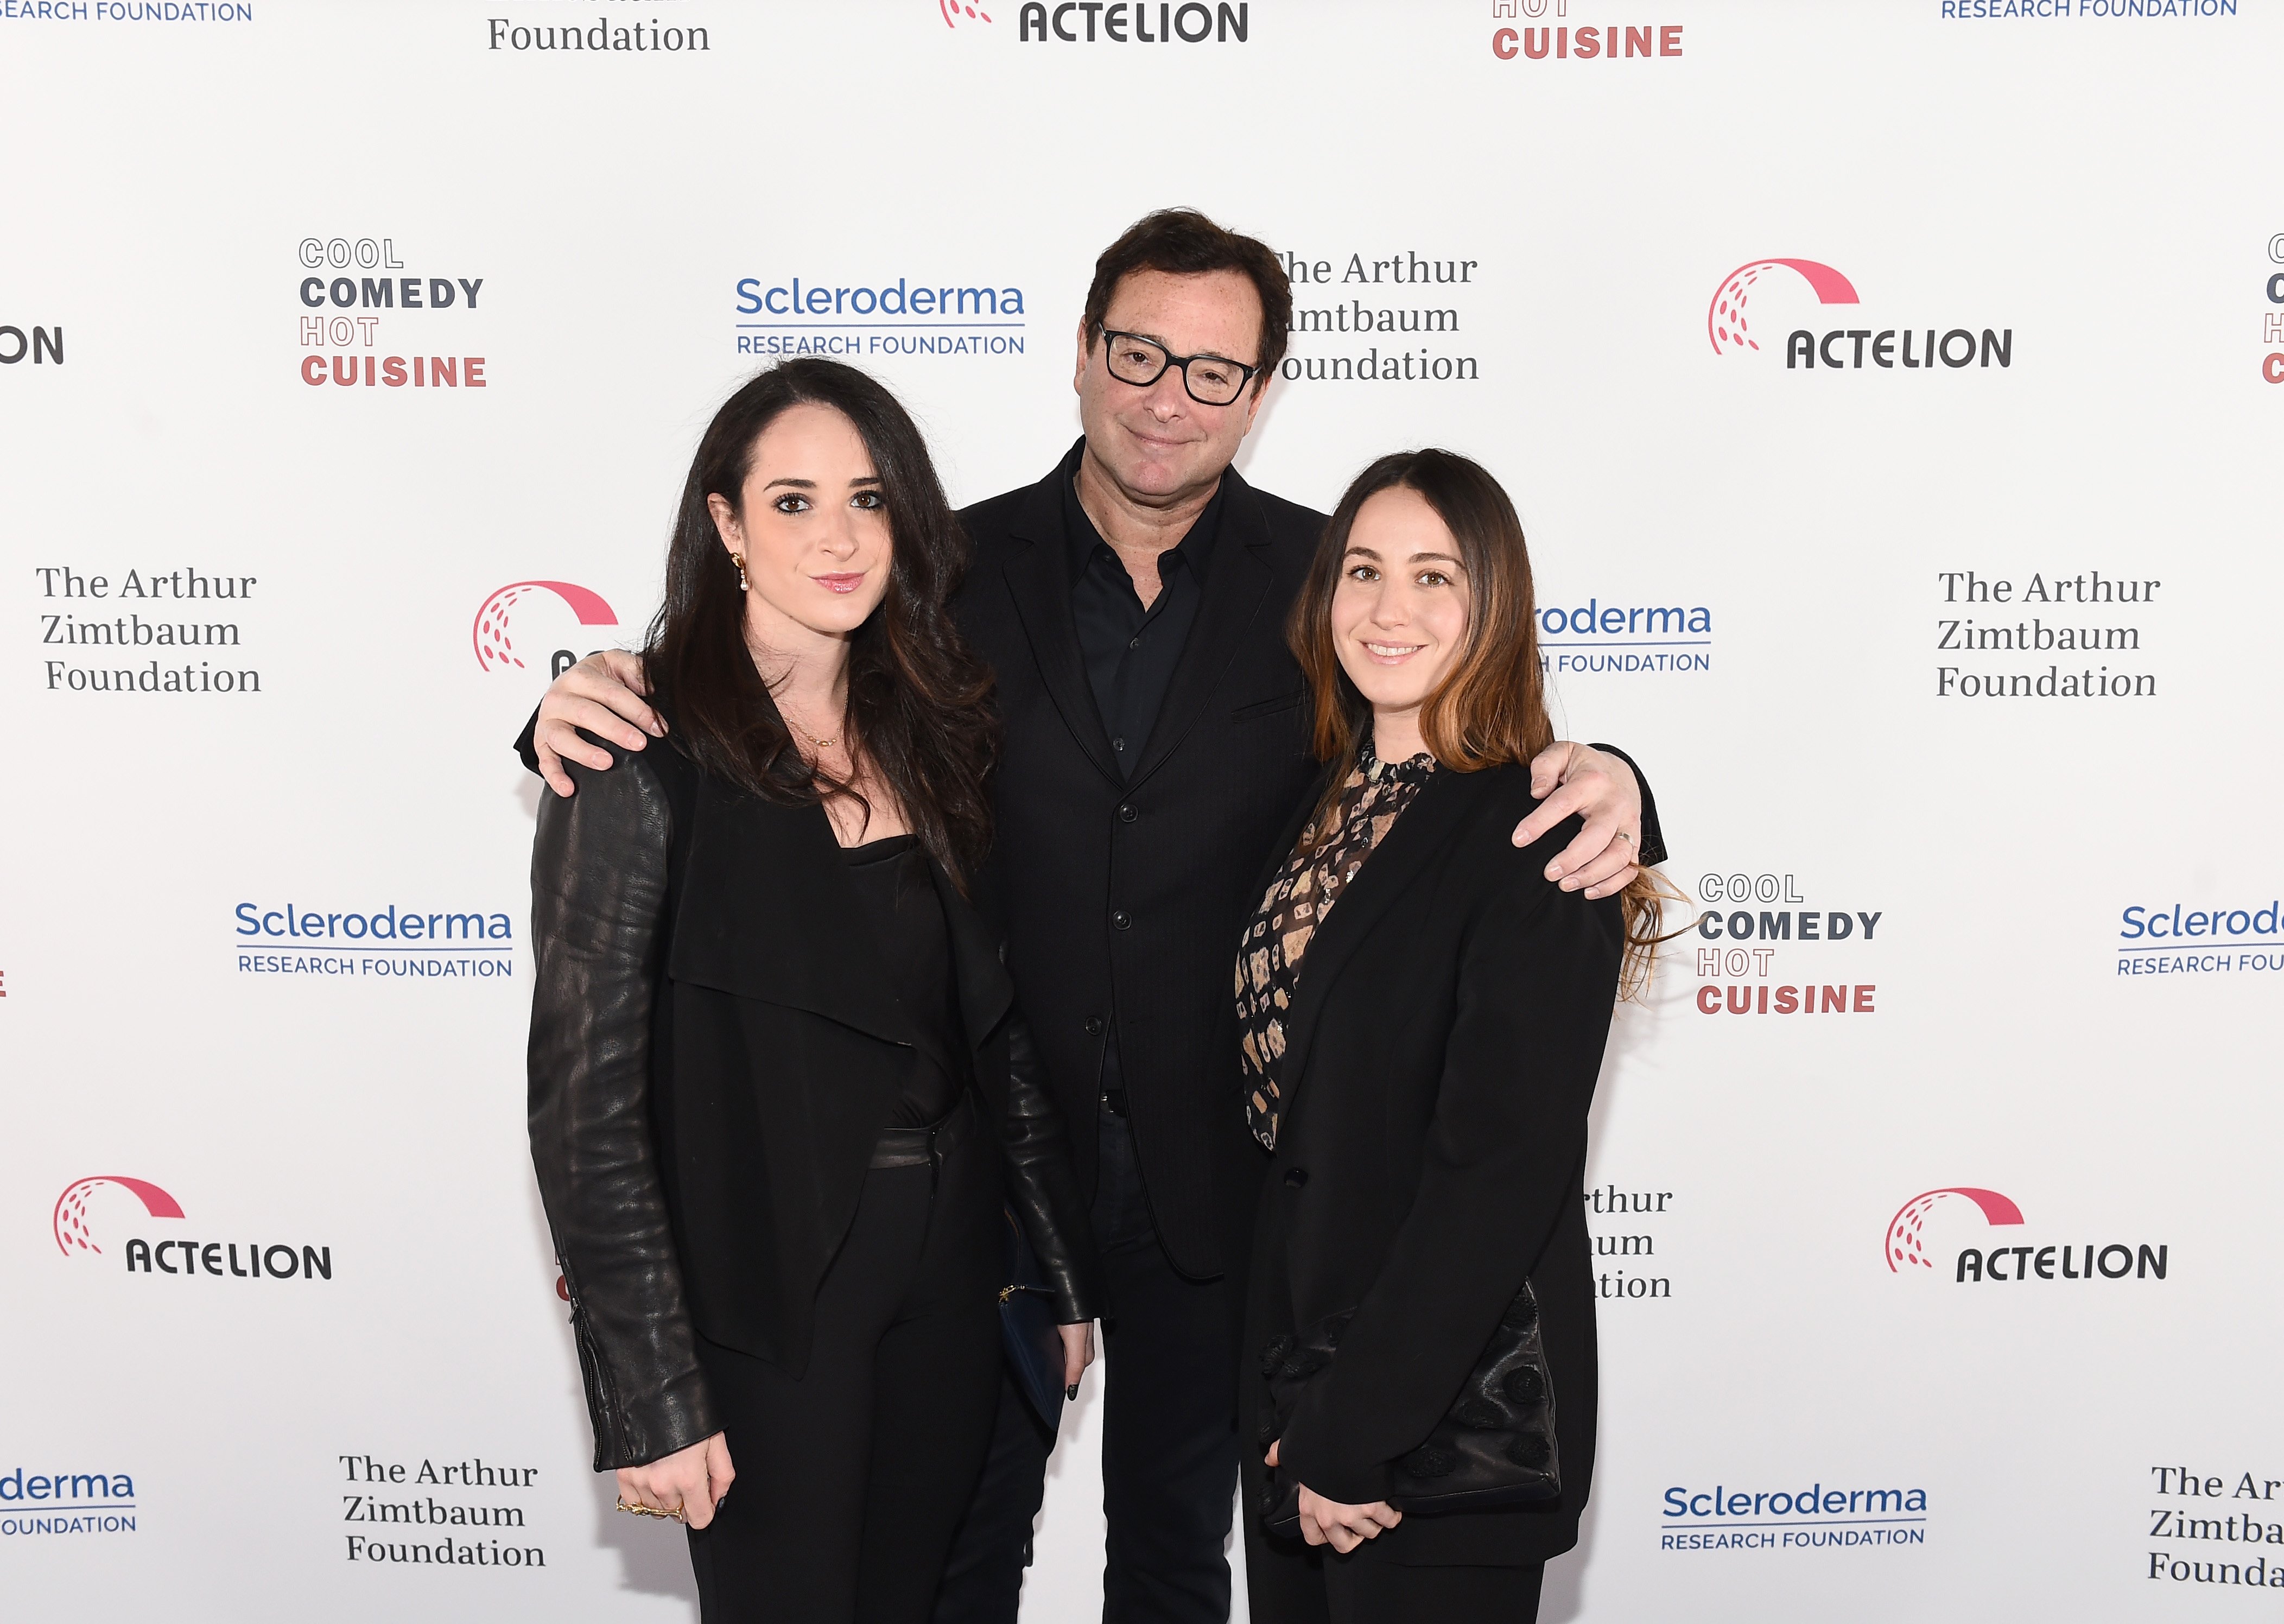 Bob Saget with daughters Aubrey Saget and Lara Saget attend Scleroderma Research Foundation's Cool Comedy - Hot Cuisine New York 2018 on December 11, 2018, in New York City. | Source: Getty Images